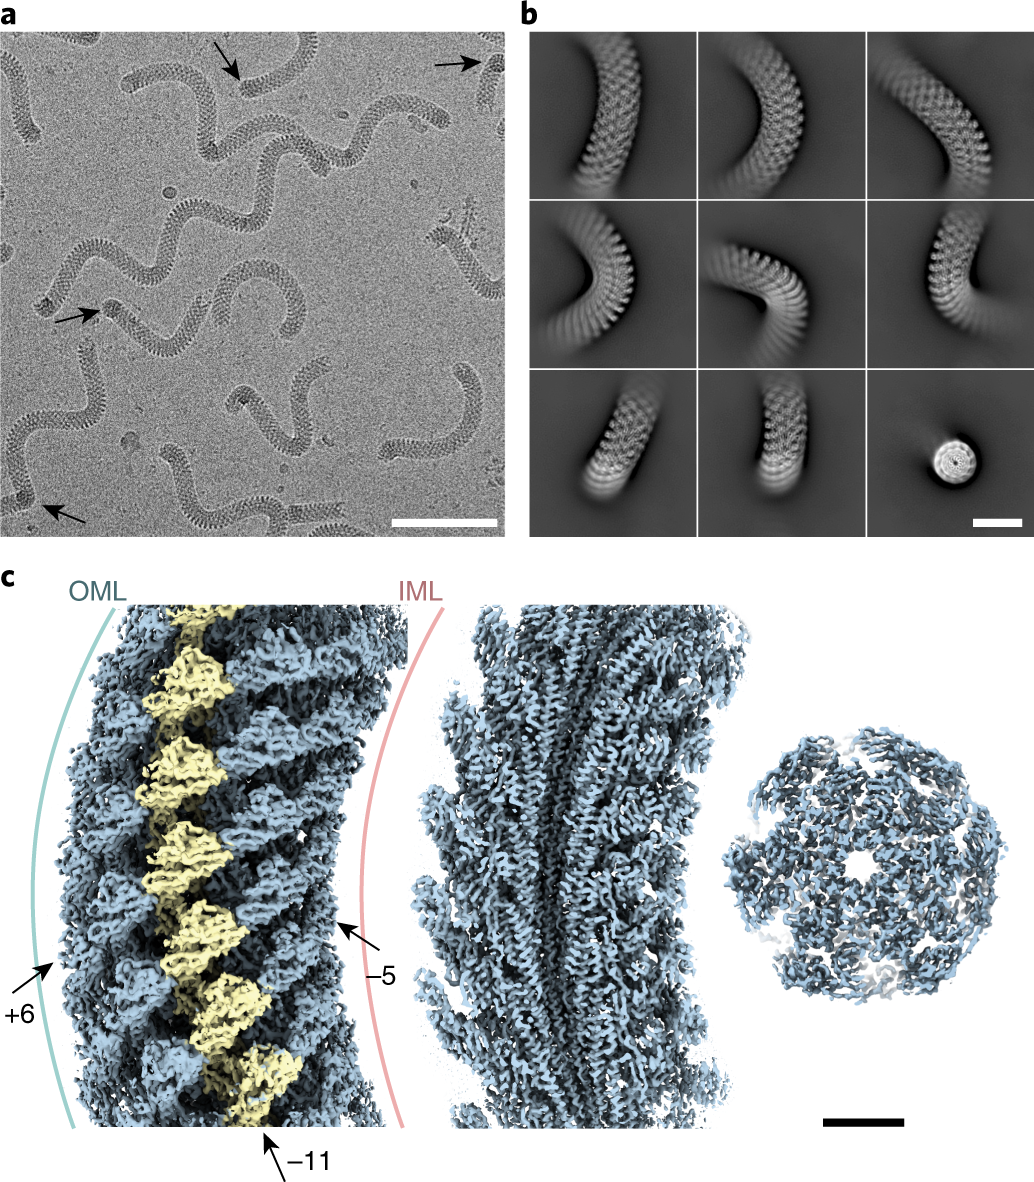 Torque transmission mechanism of the curved bacterial flagellar hook  revealed by cryo-EM | Nature Structural & Molecular Biology